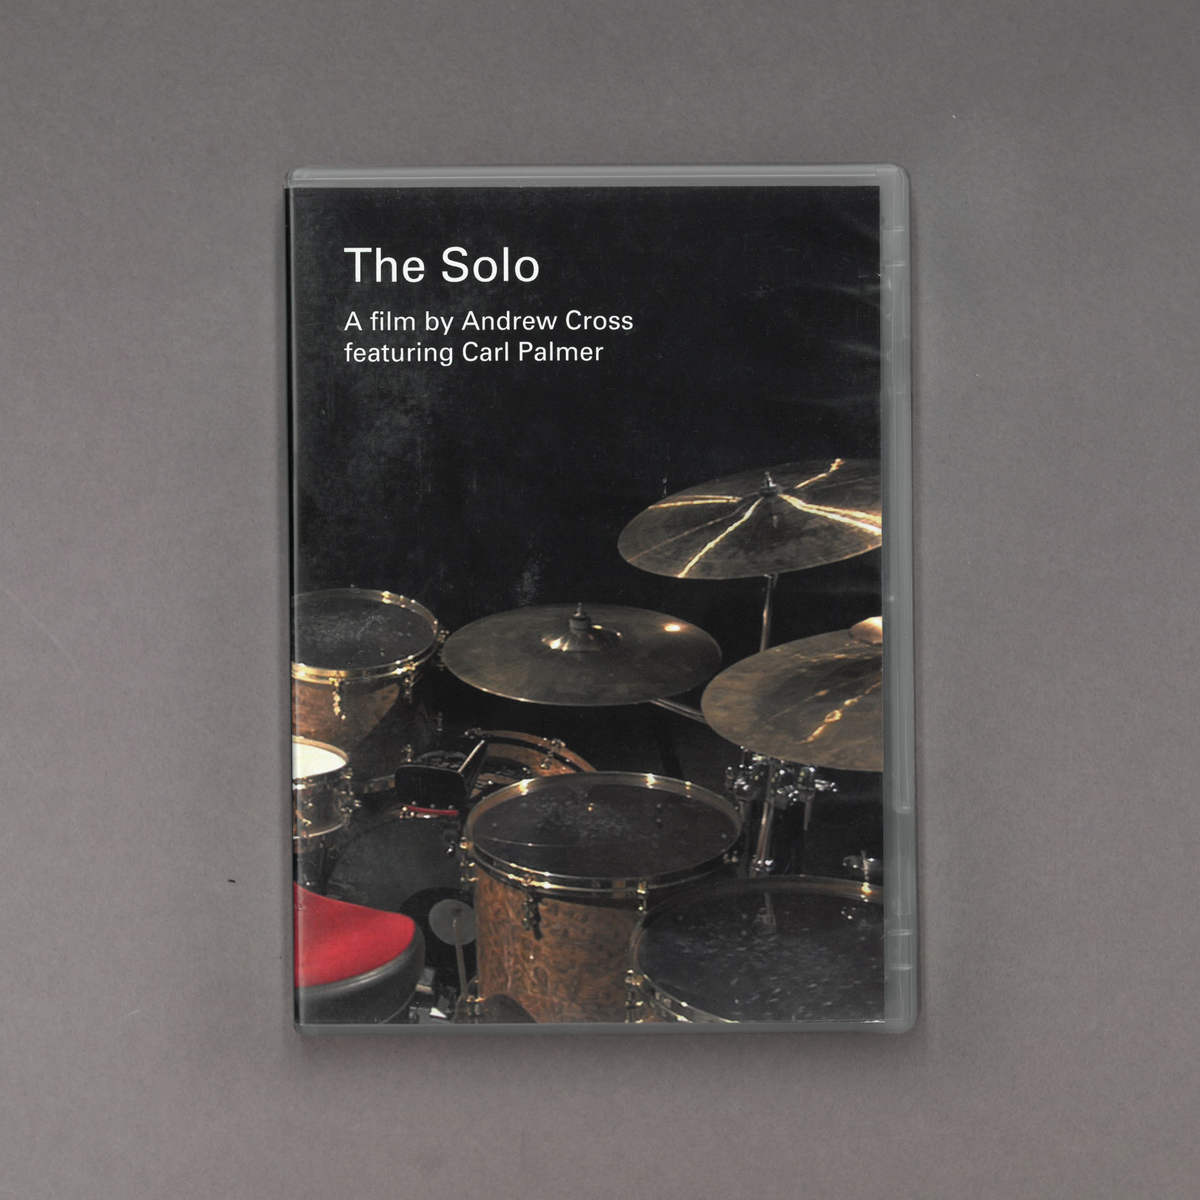 The Solo DVD